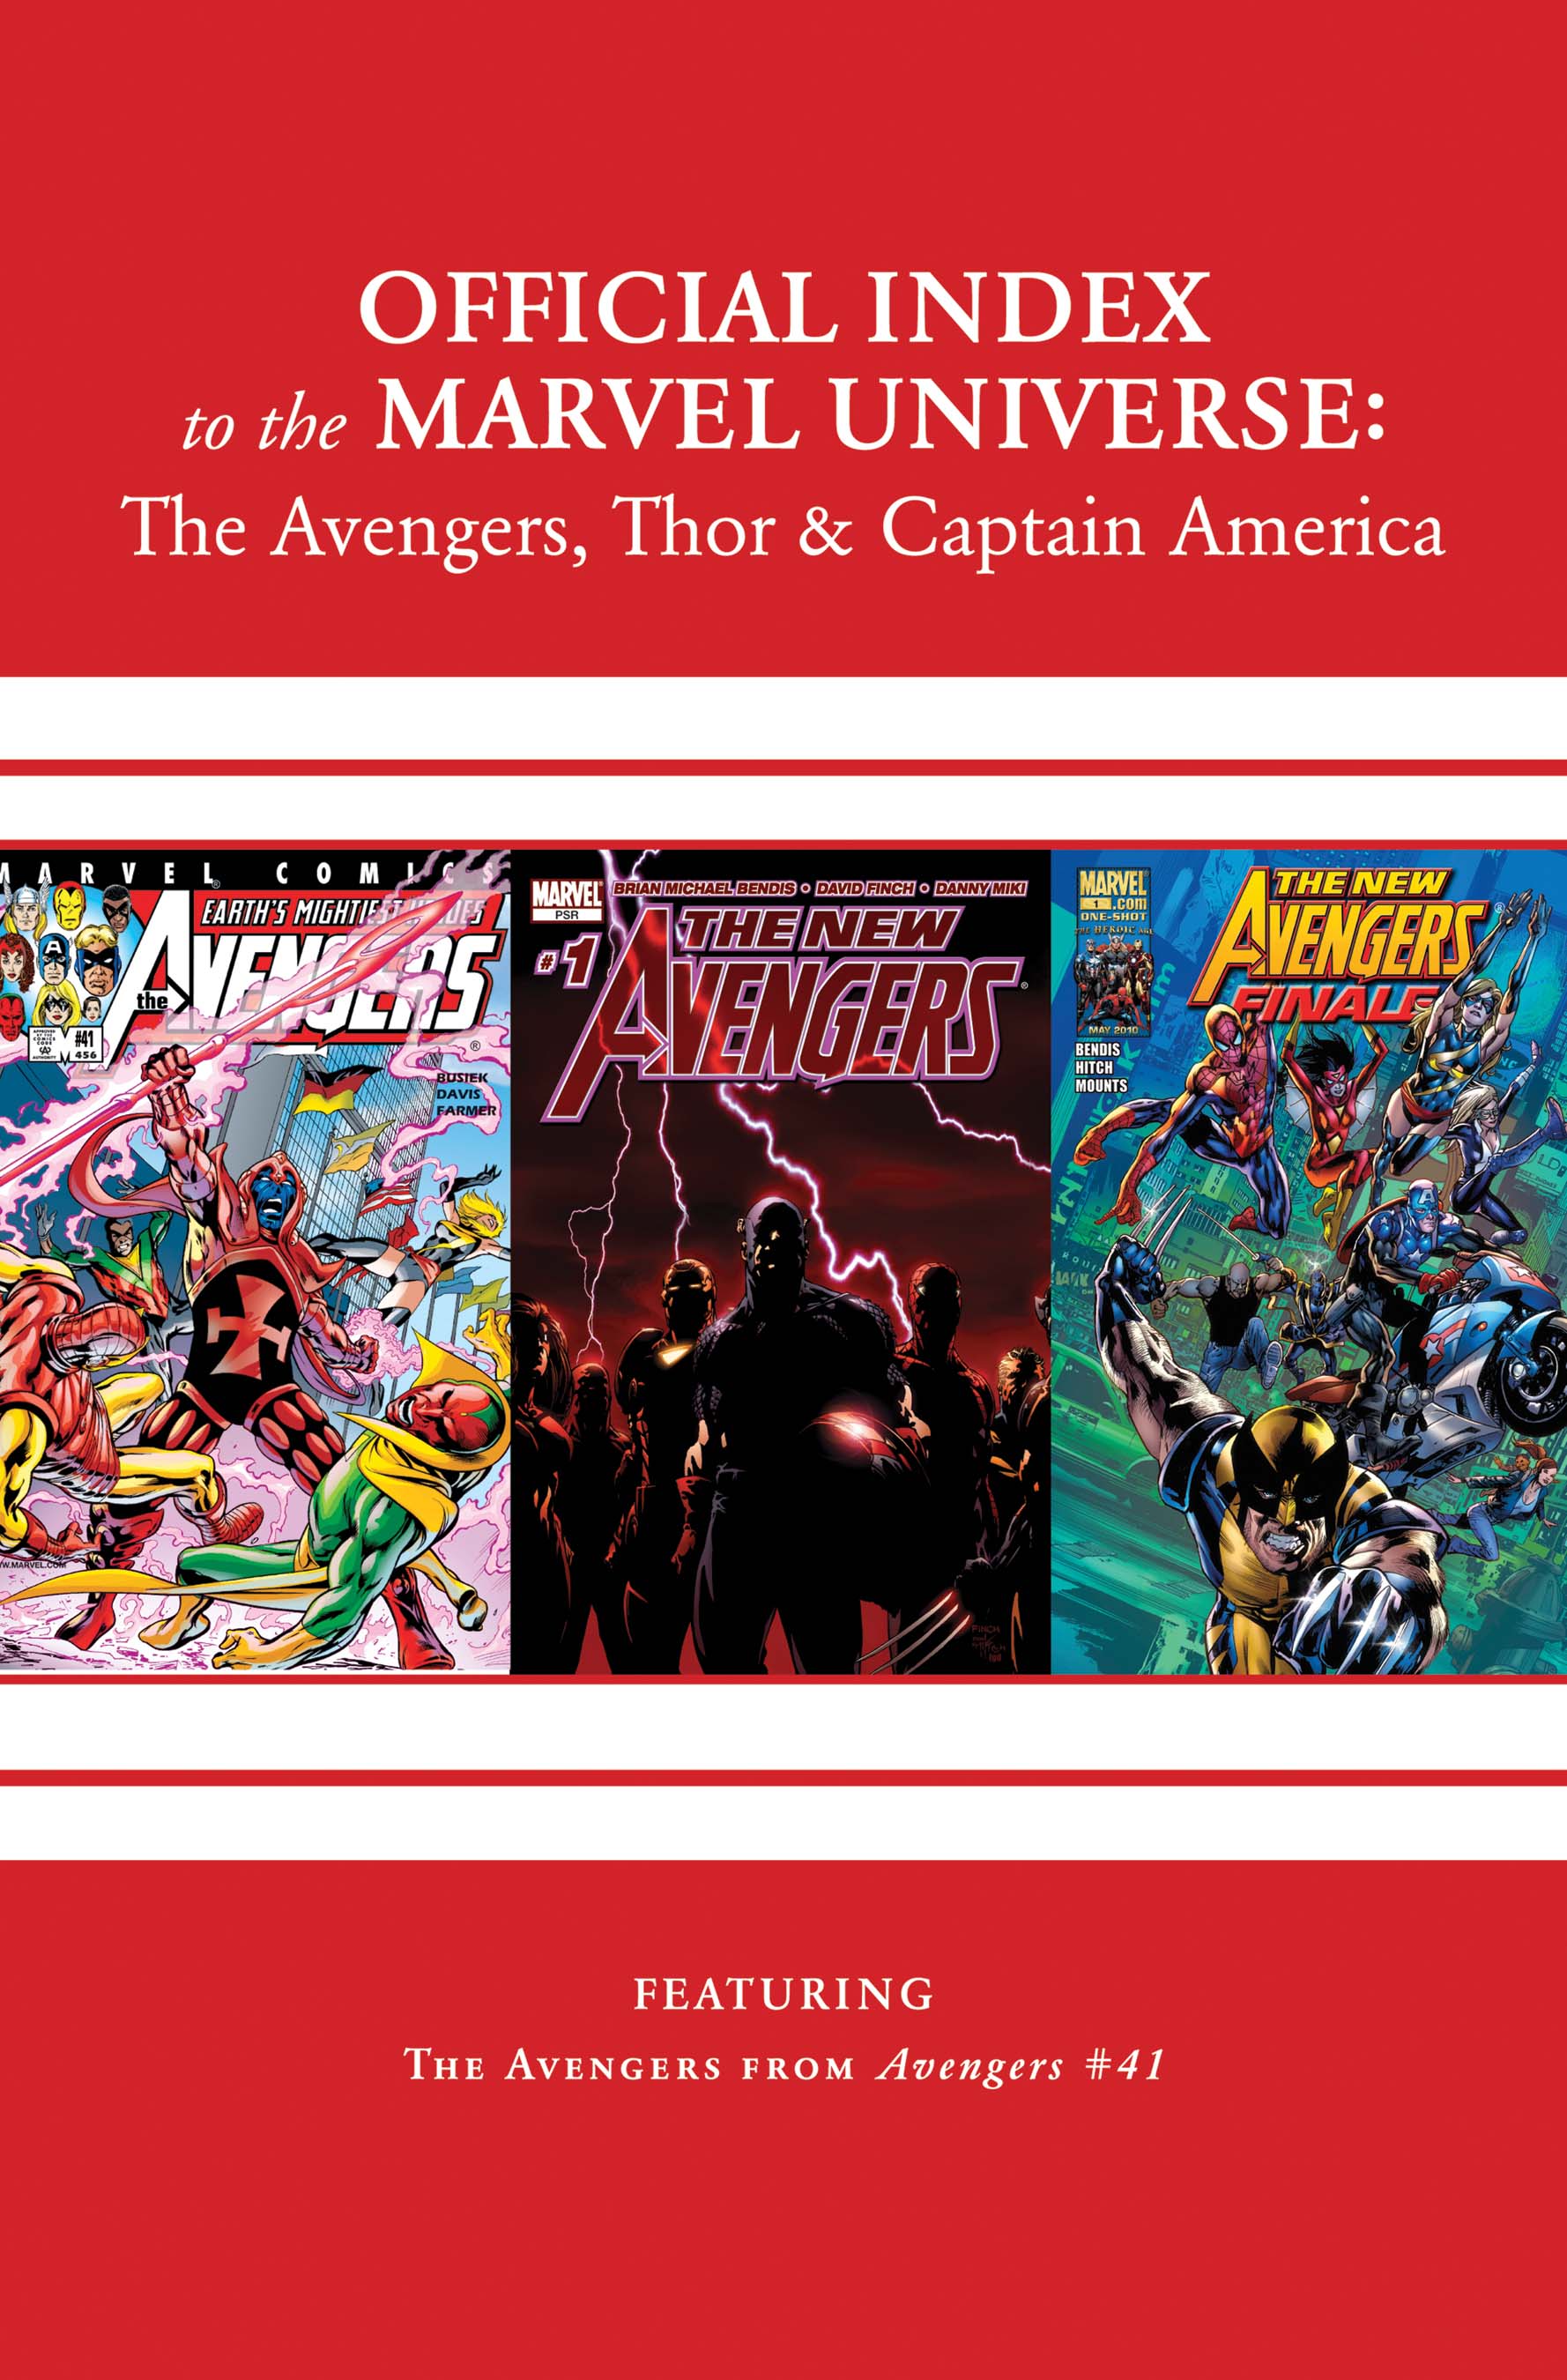 Avengers, Thor & Captain America: Official Index to the Marvel Universe (2011) #15